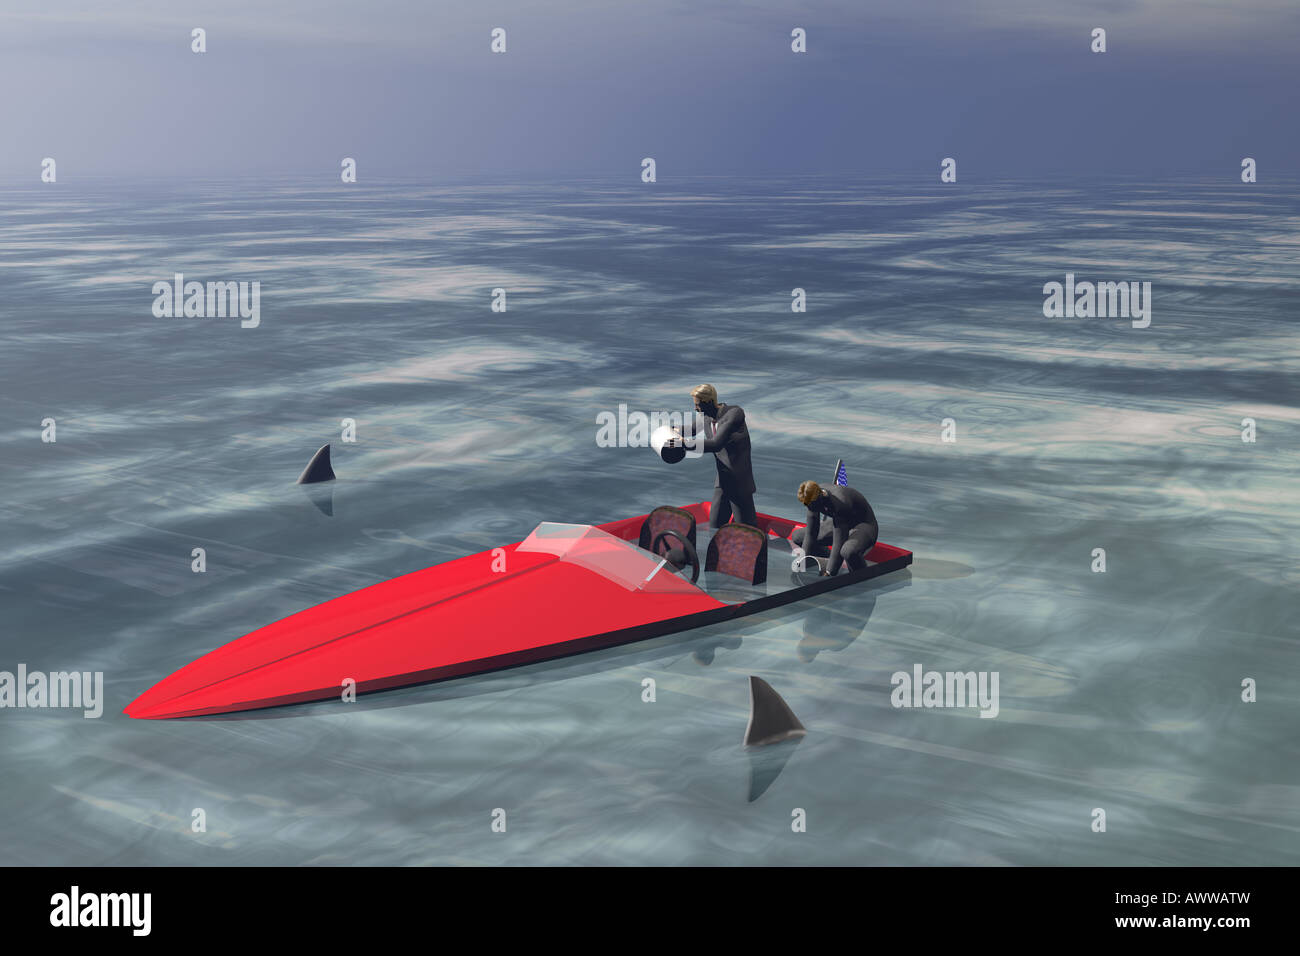 Businessmen bailing out a sinking boat while circled by sharks. Stock Photo